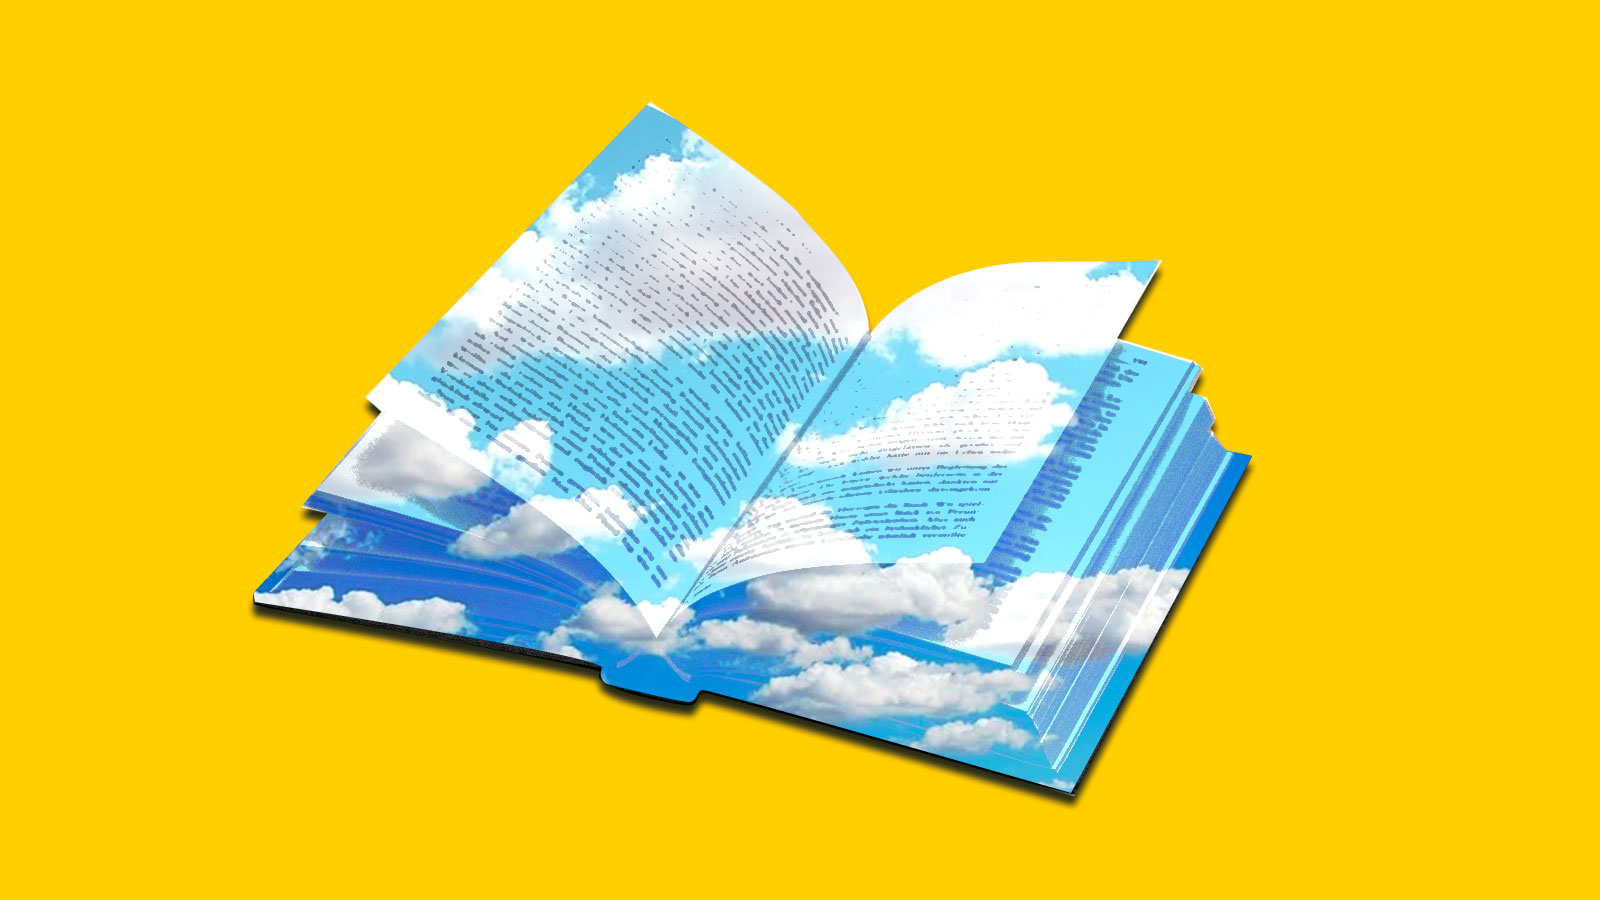 Collage: an open book with blue cloudy sky on top of it